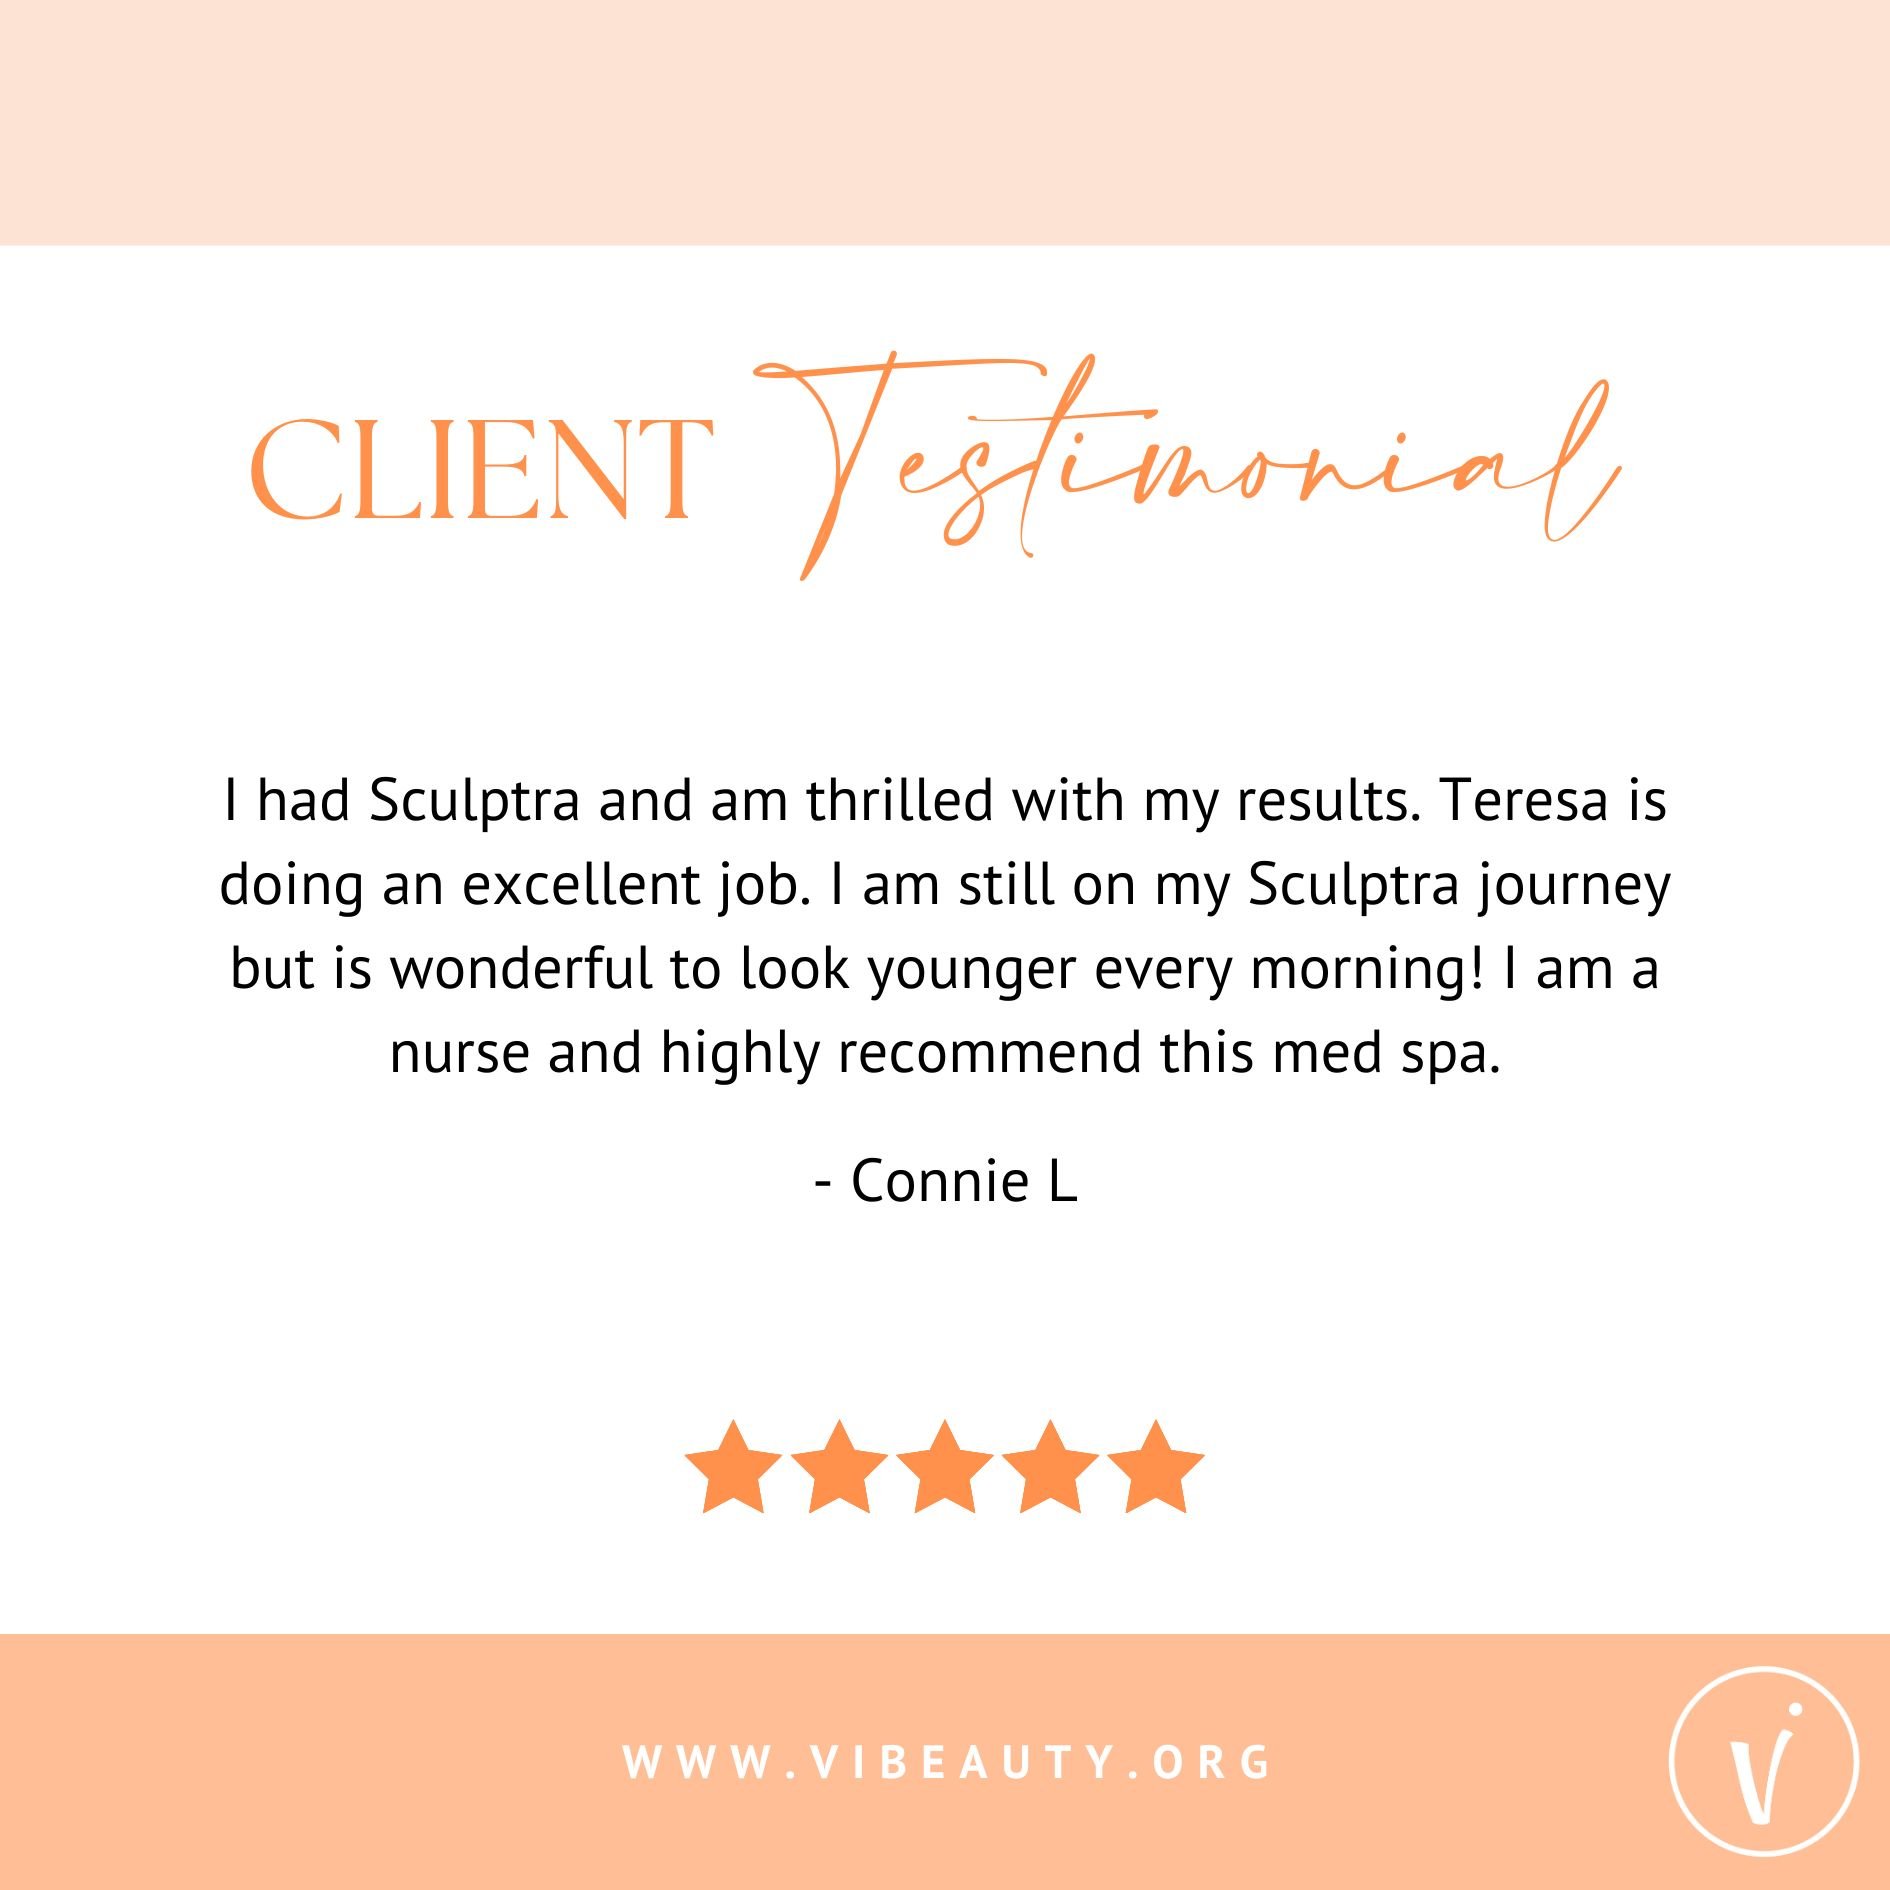 &quot;It's wonderful to look younger every morning&quot; might be the best thing we've ever heard! We are so happy &amp; honored to be a part of your self-care journey🧡 Learn more about Sculptra at www.vibeauty.org/sculptra #fivestarreview #5StarRev